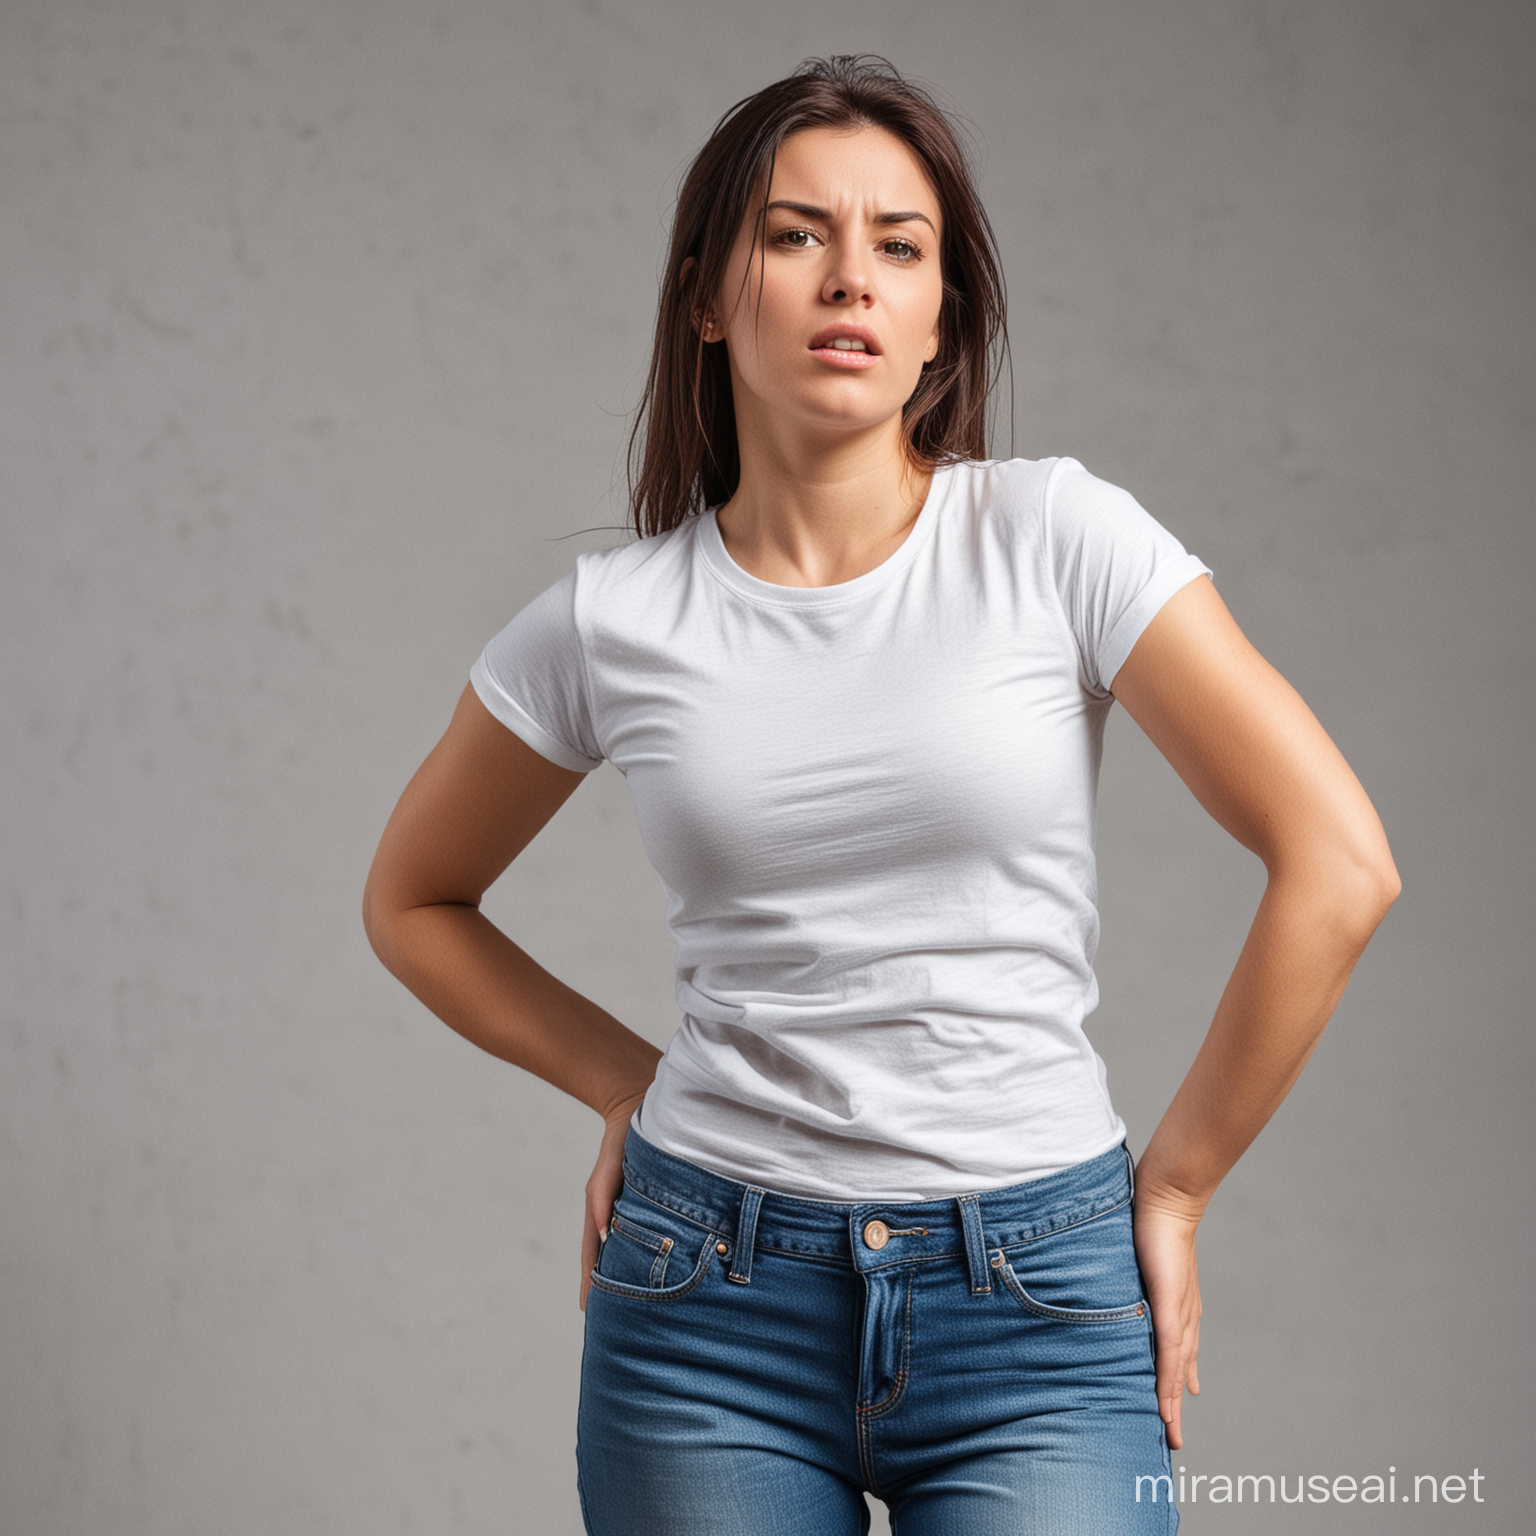 Casual Woman Sweating in TShirt and Jeans